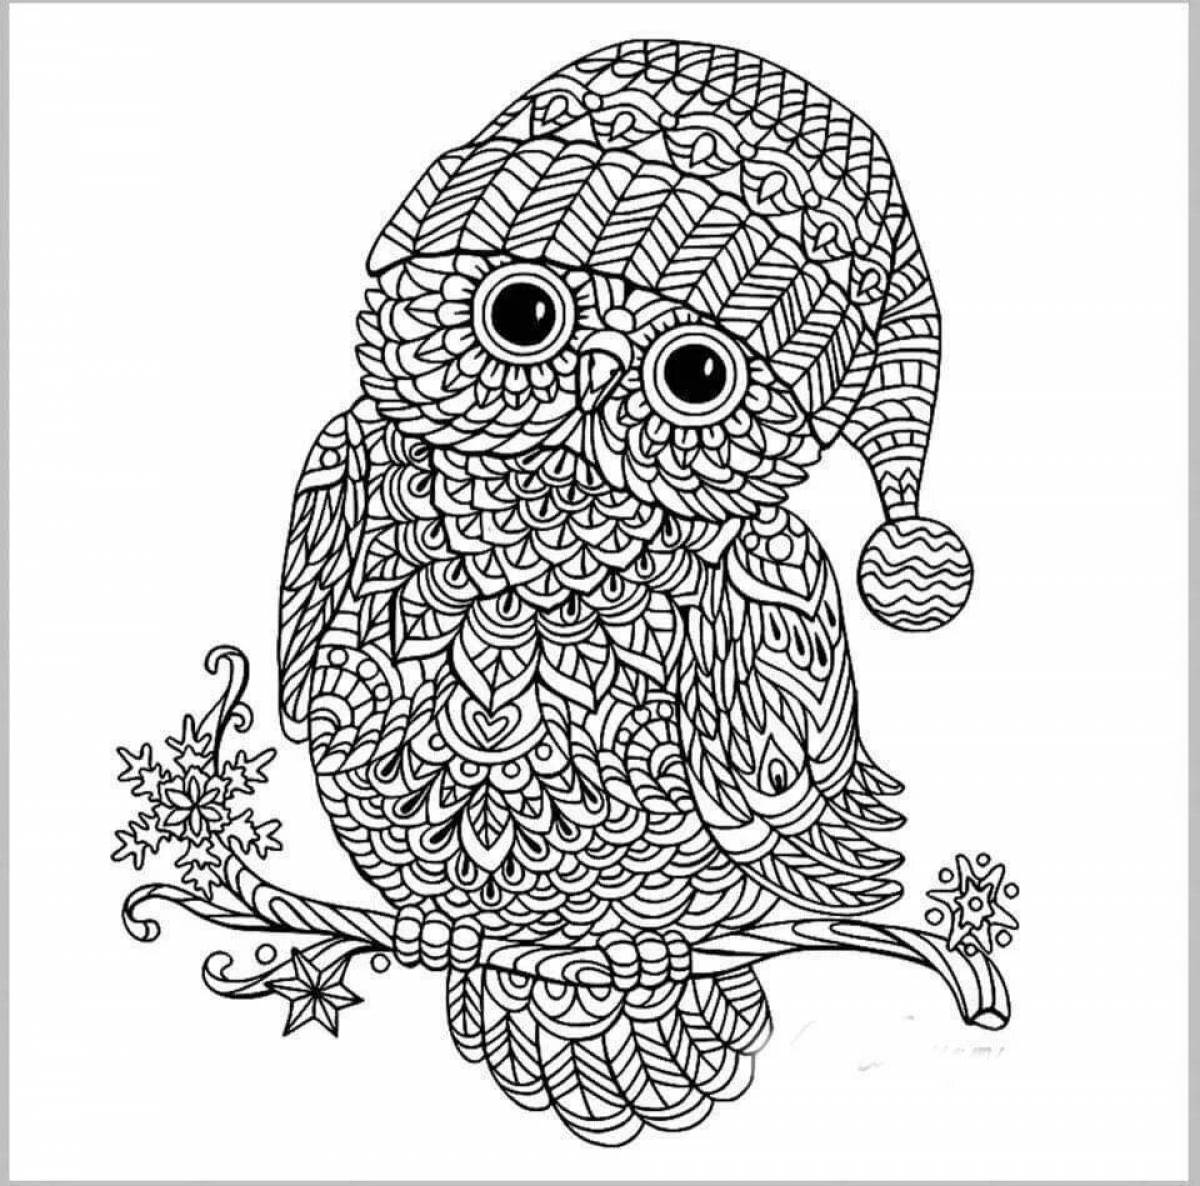 Fascinating coloring simple pencil antistress coloring page